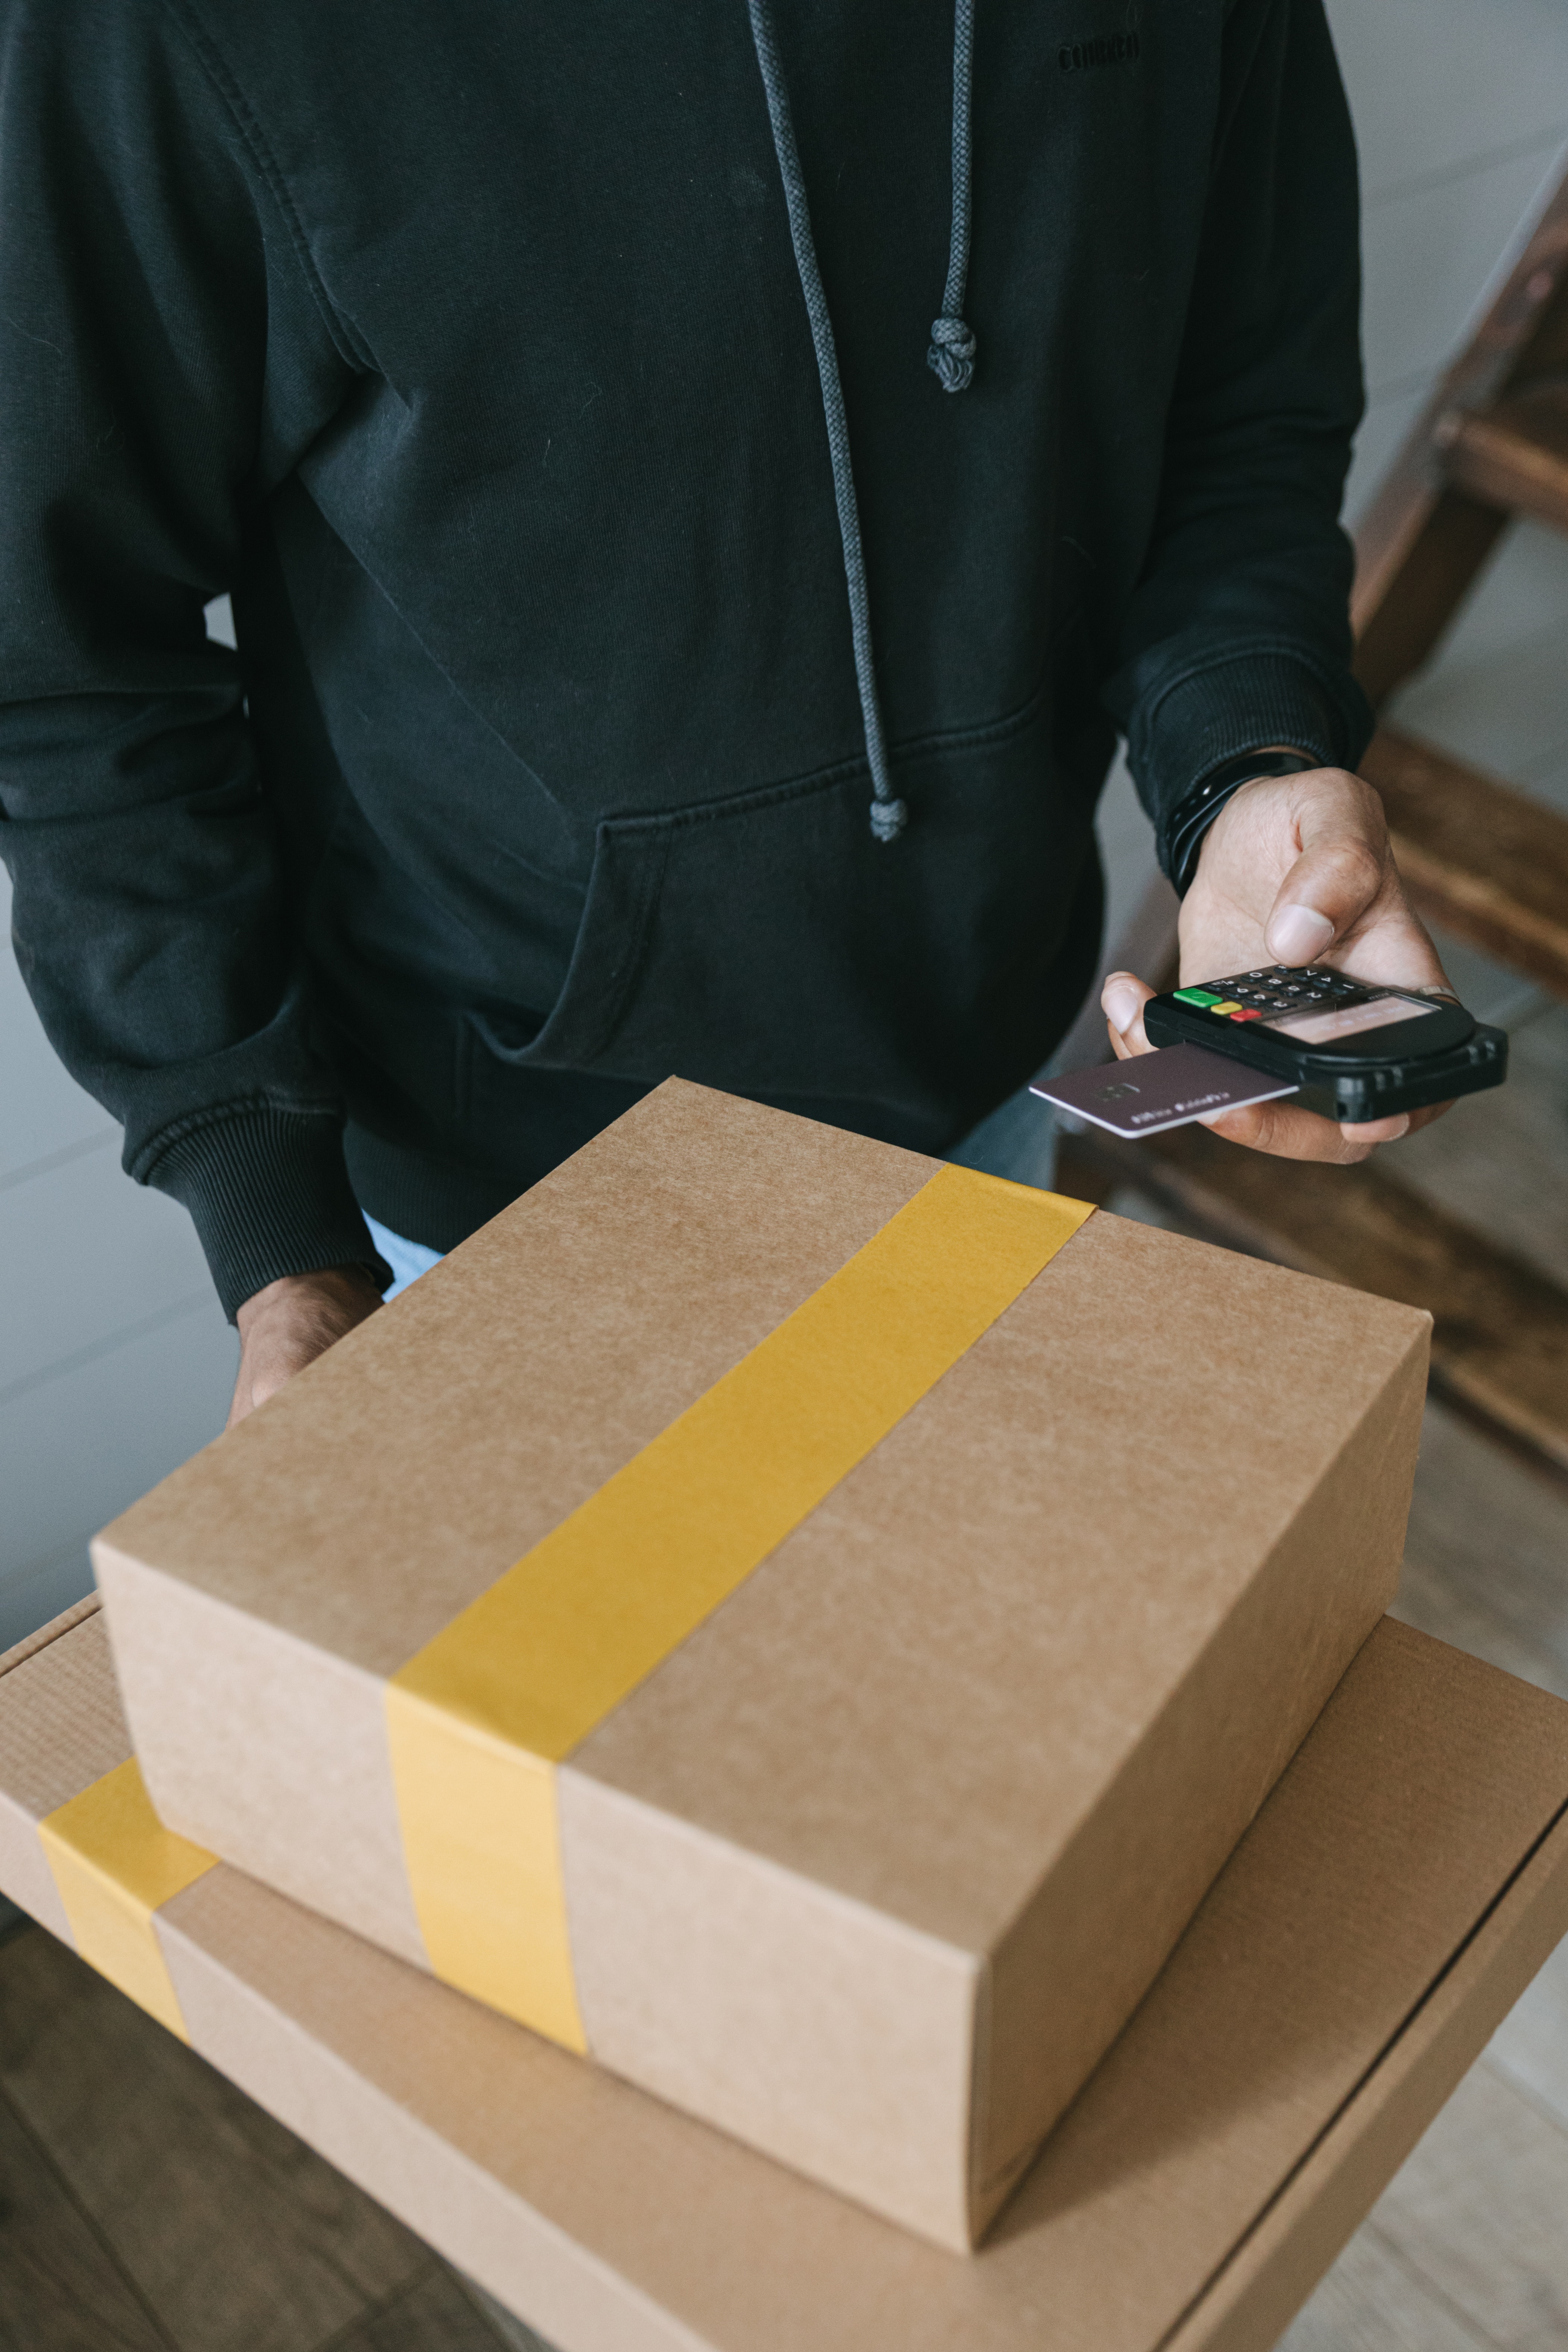 Case Study: Delivery Service